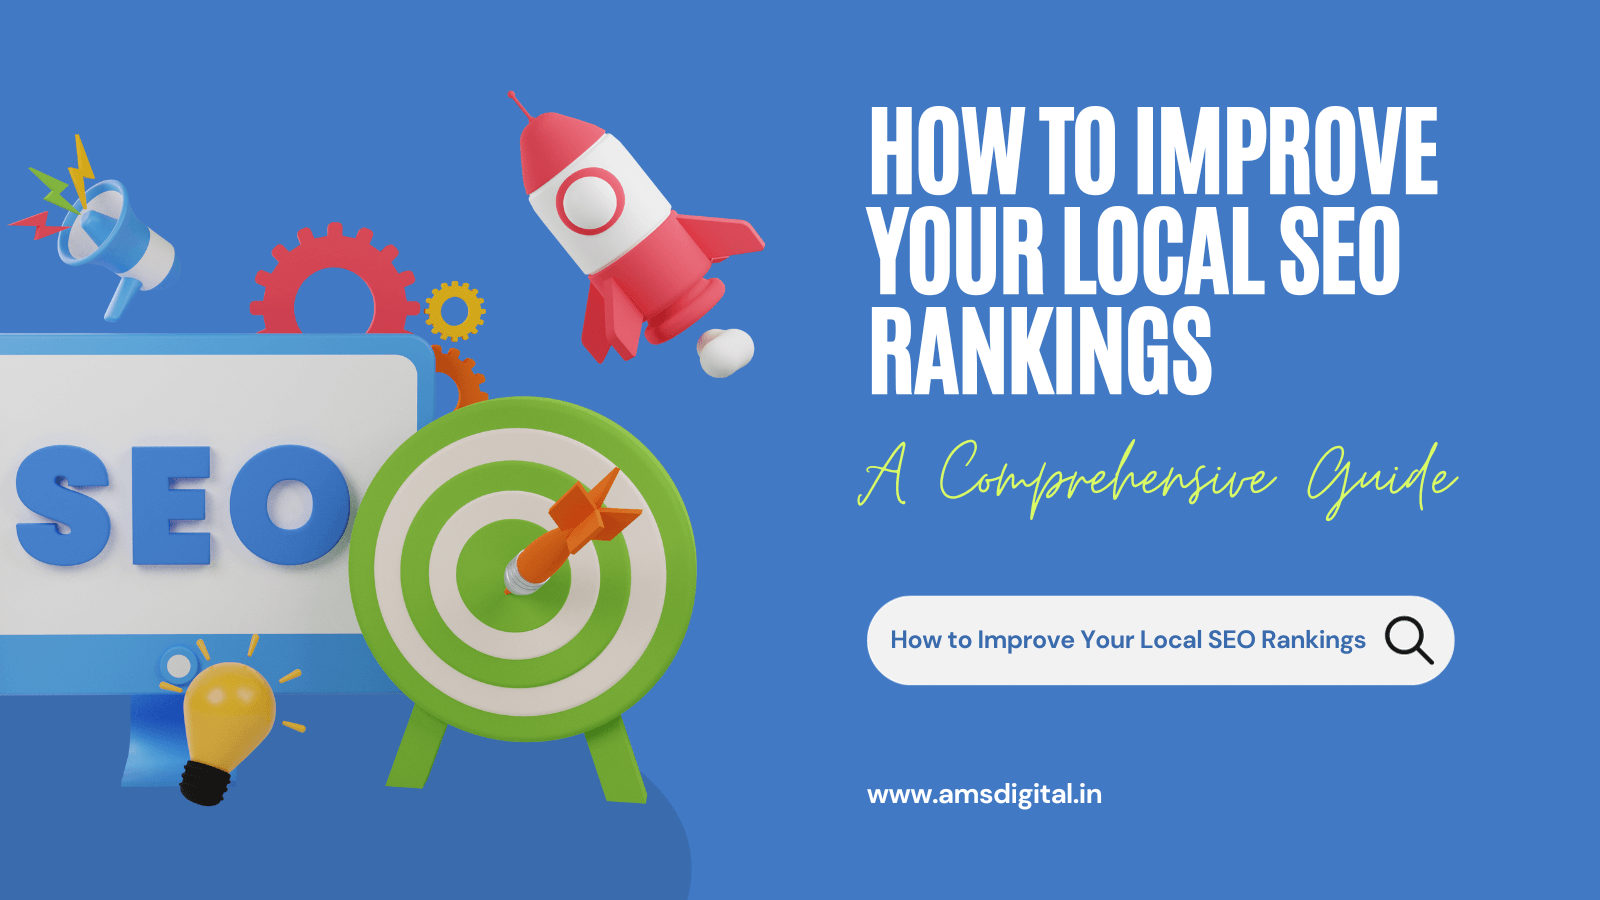 How to Improve Your Local SEO Rankings: A Comprehensive Guide